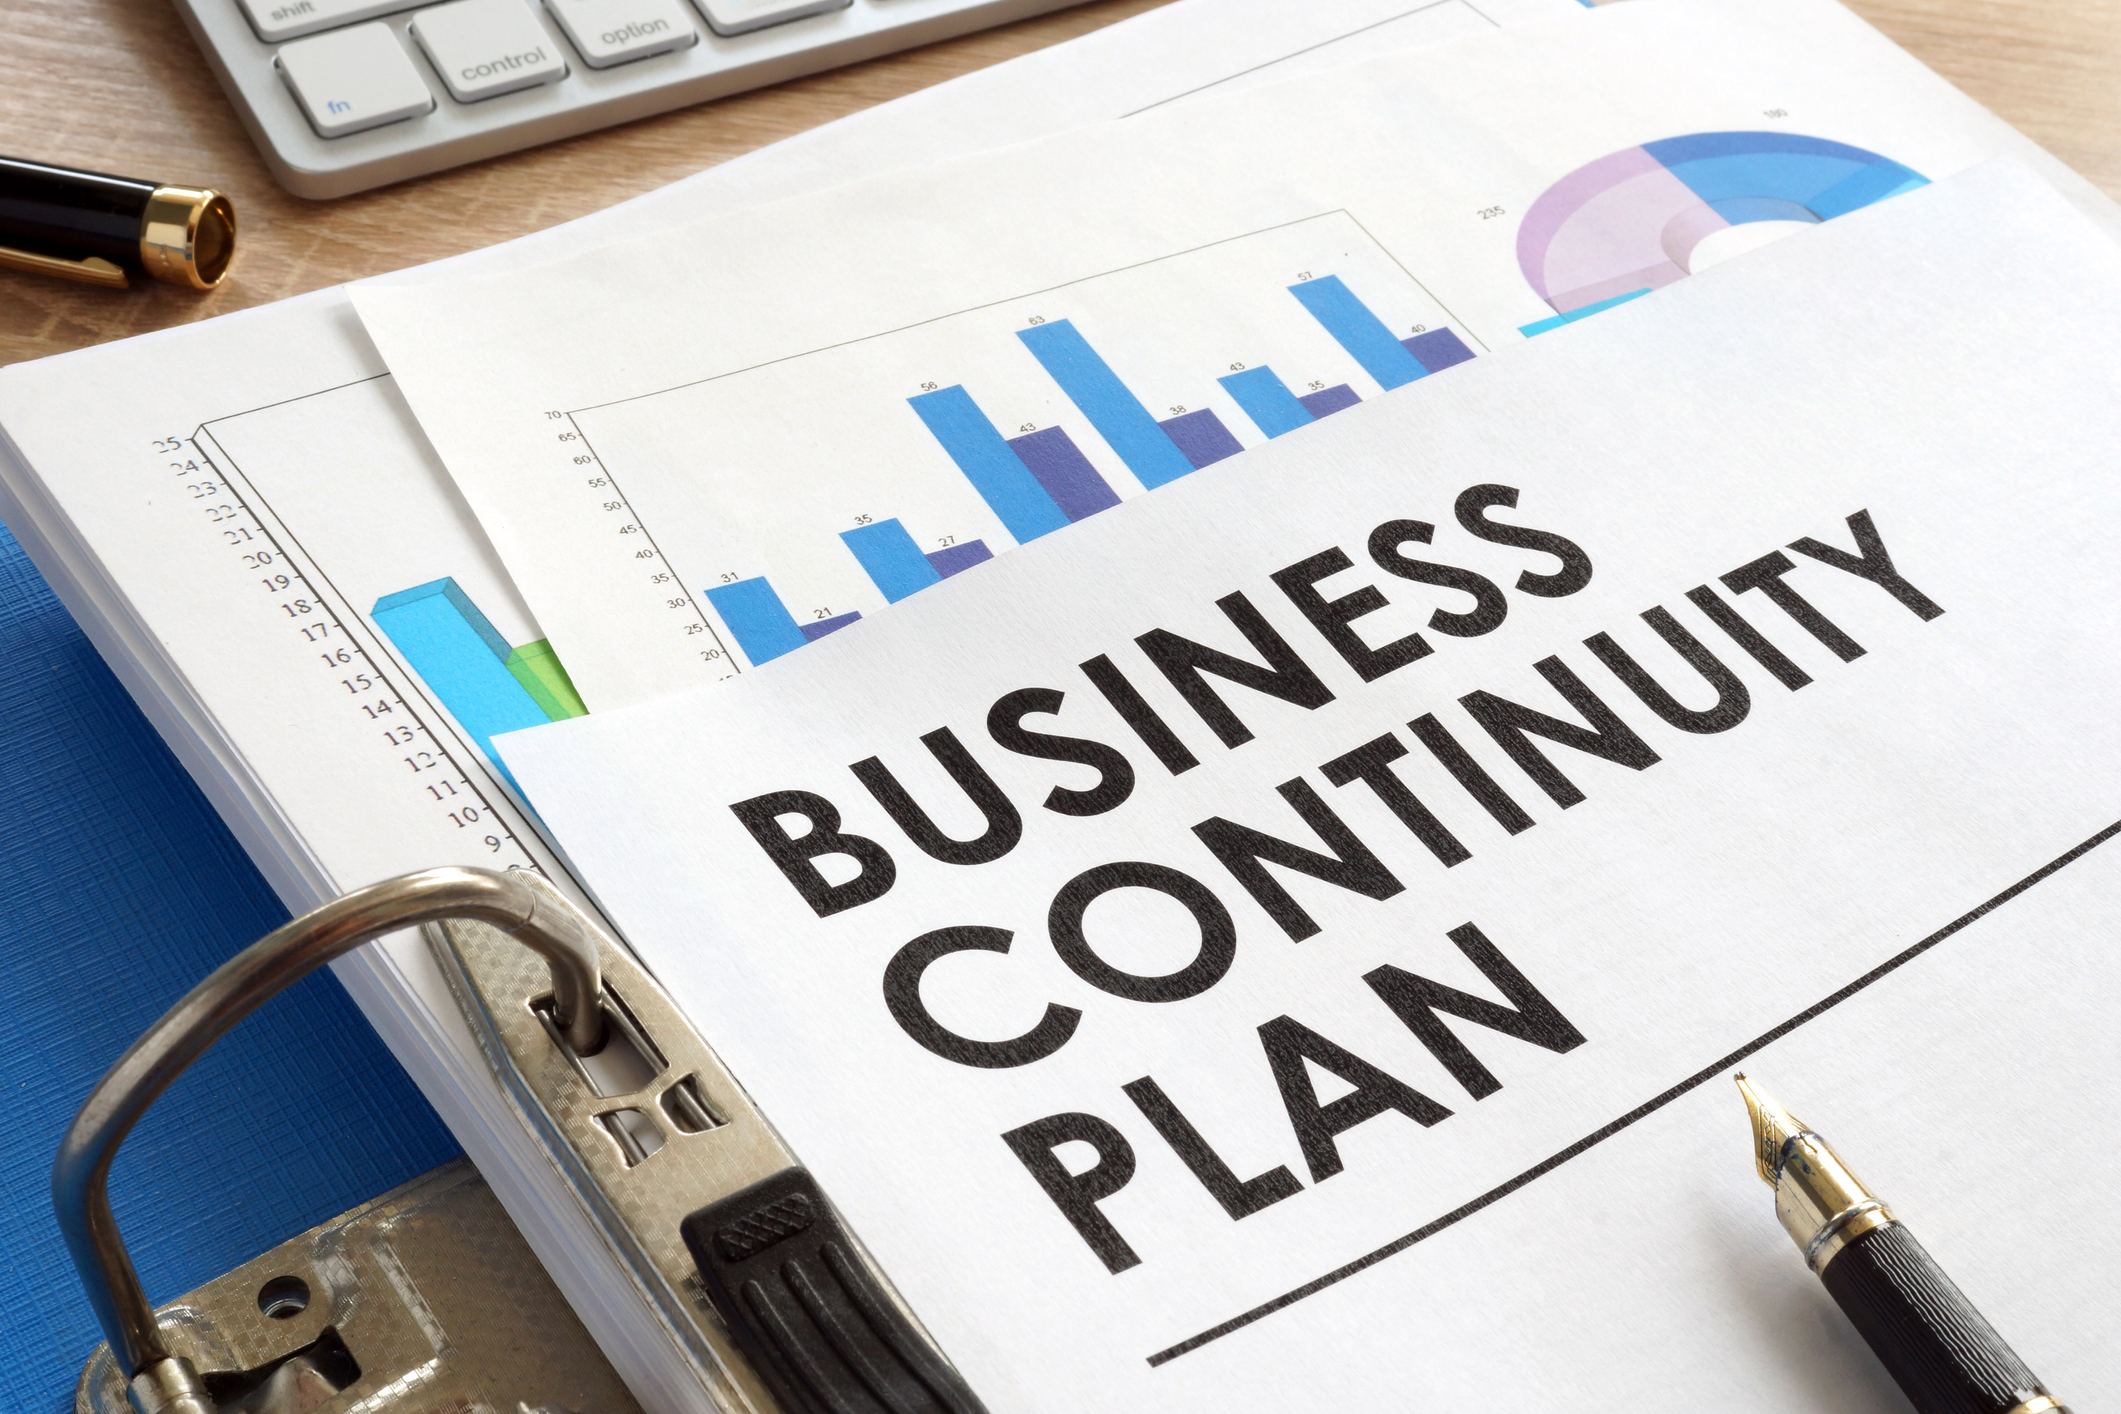 business continuity plan for pandemic